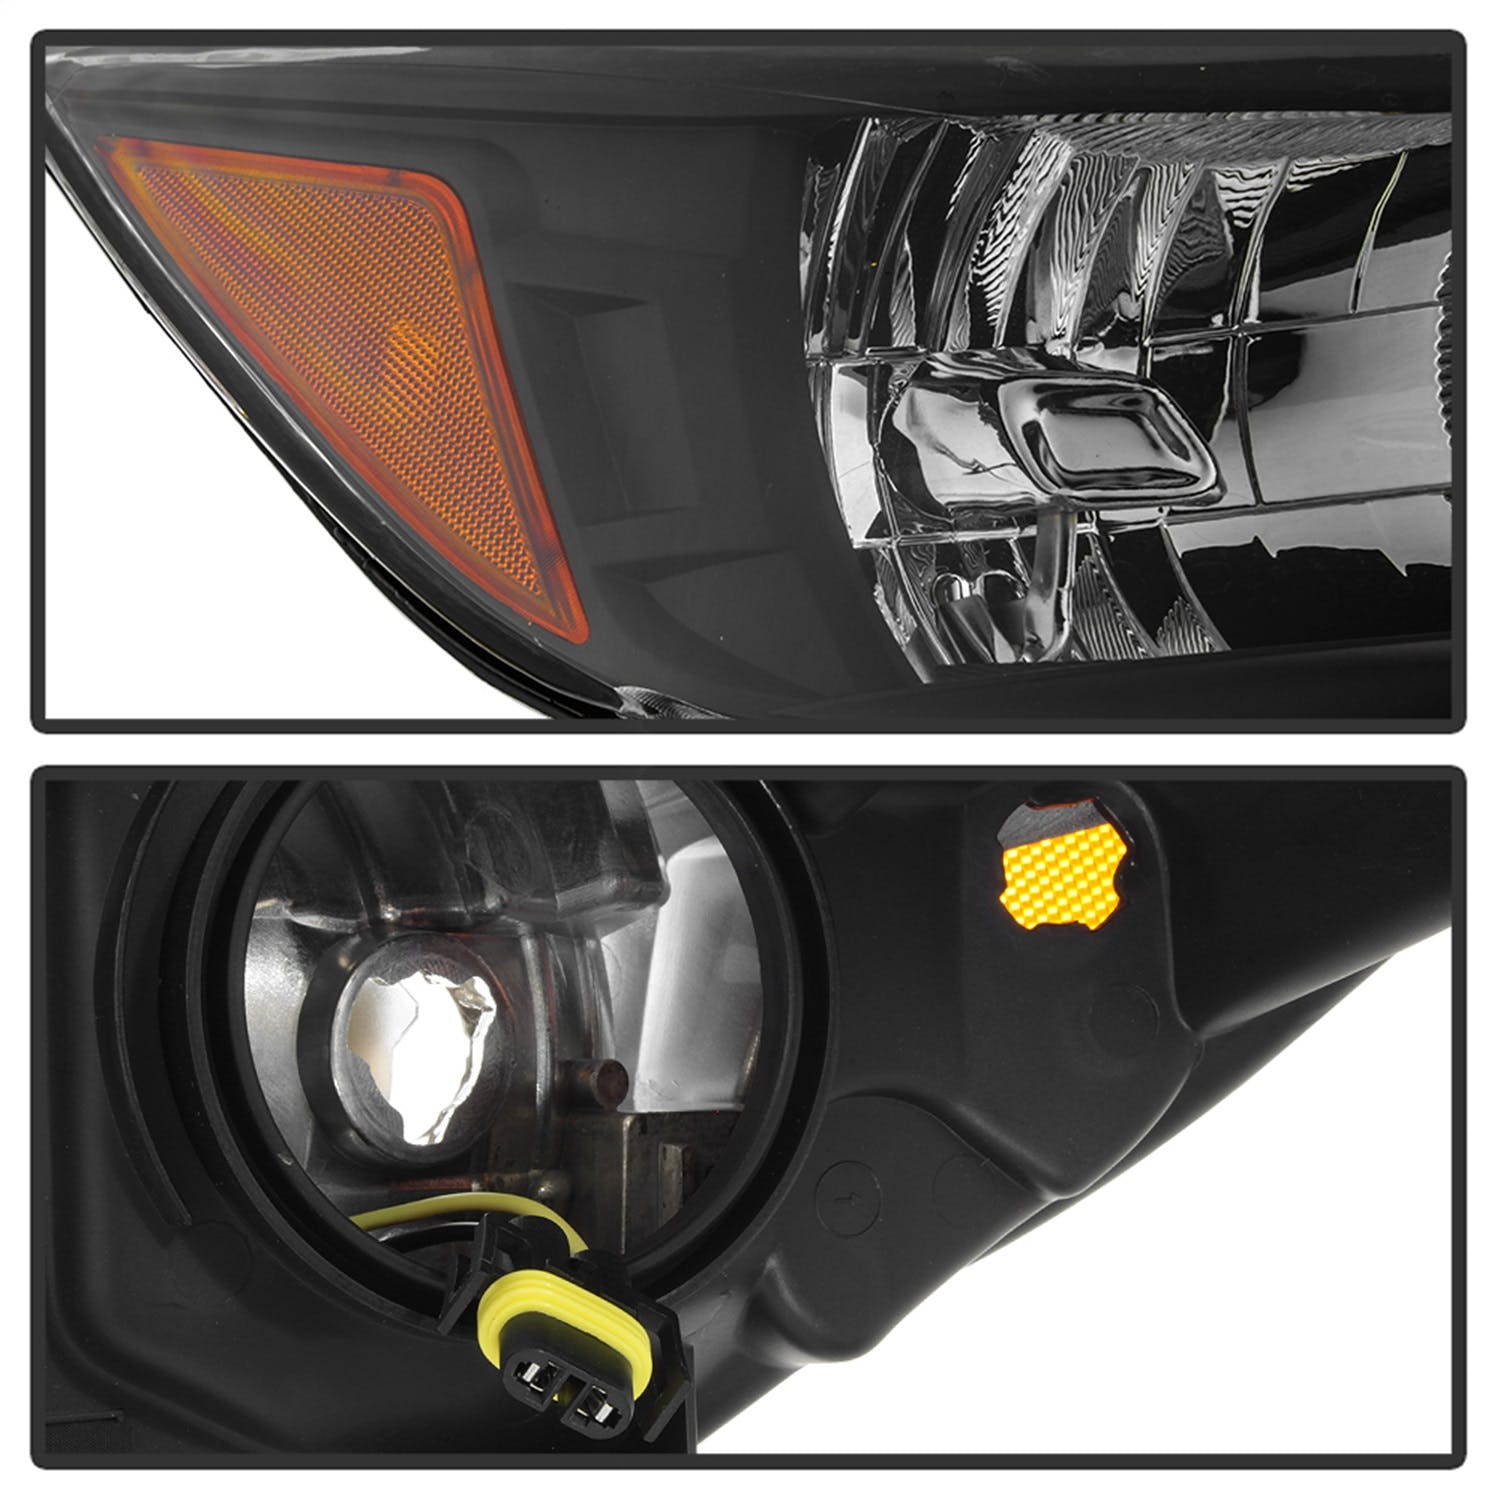 XTUNE POWER 9042454 Ford Escape 2013 2016 OEM Style Headlights Black Low Beam H11 ; Hi Beam 9005